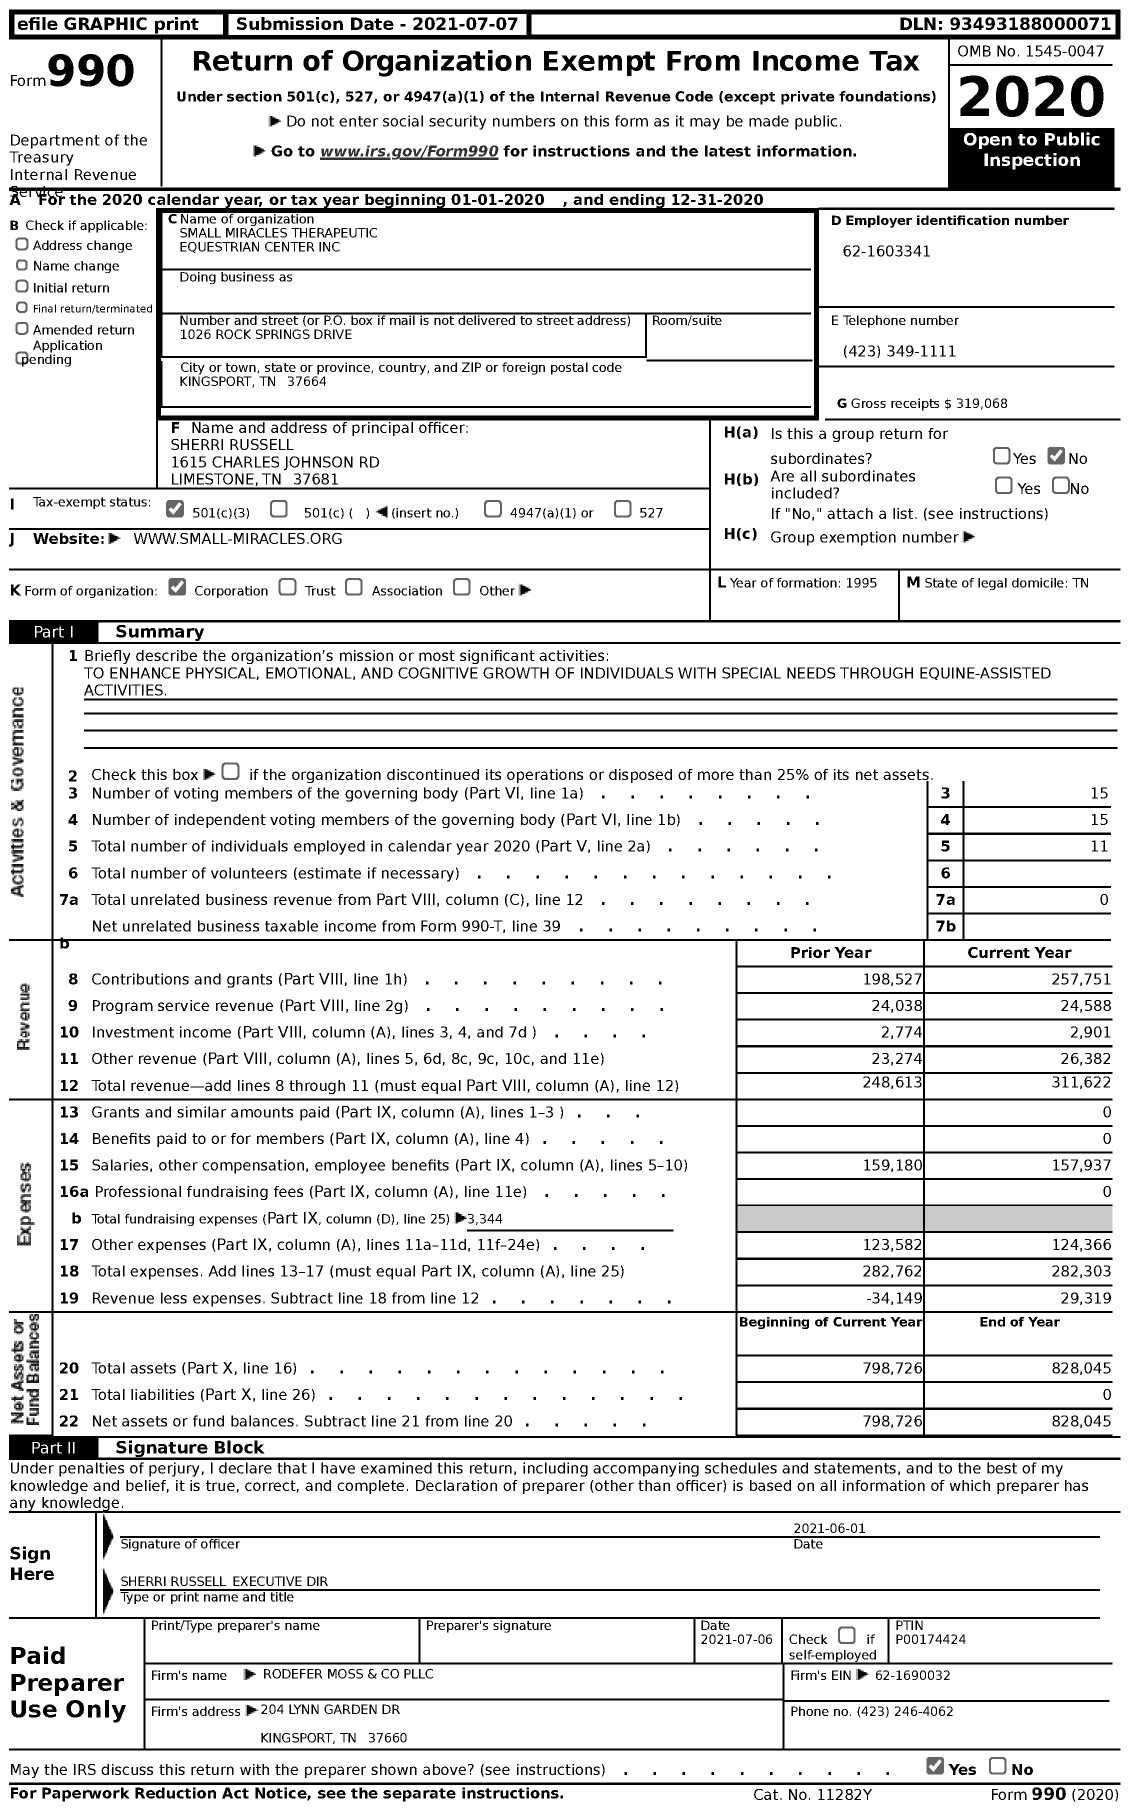 Image of first page of 2020 Form 990 for Small Miracles Therapeutic Equestrian Center